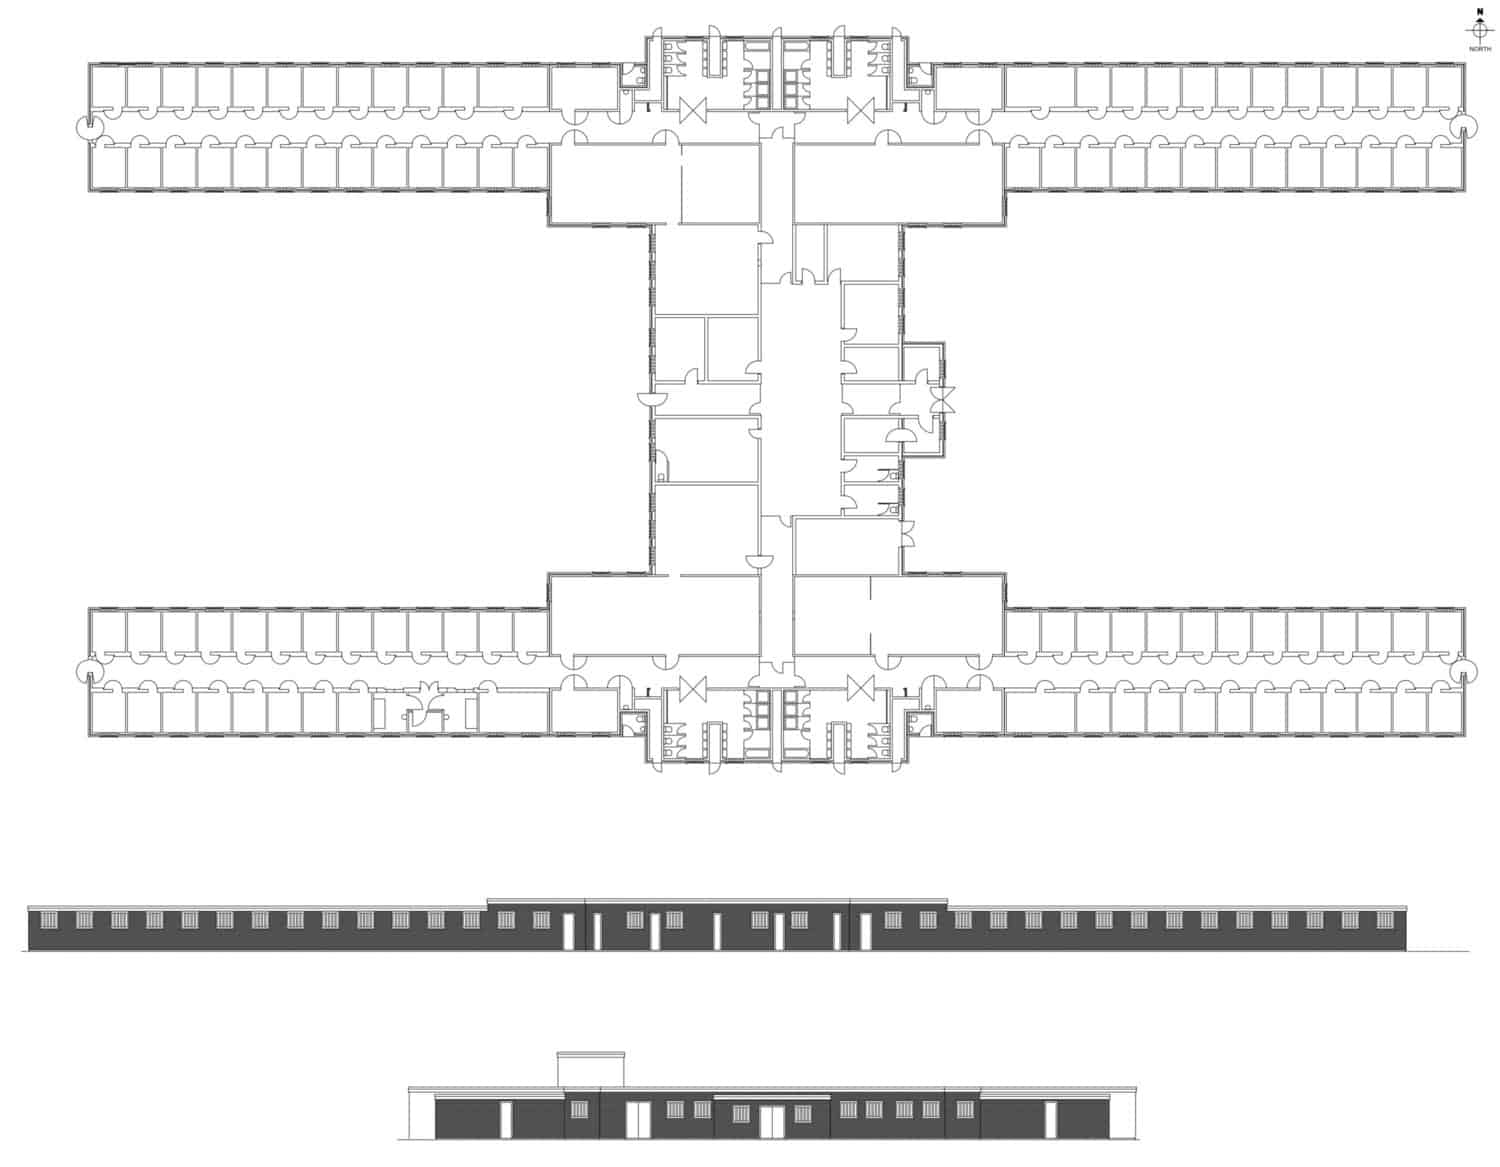 H-Block 6 Plan and elevations in the archive of Steve Jensen Design.